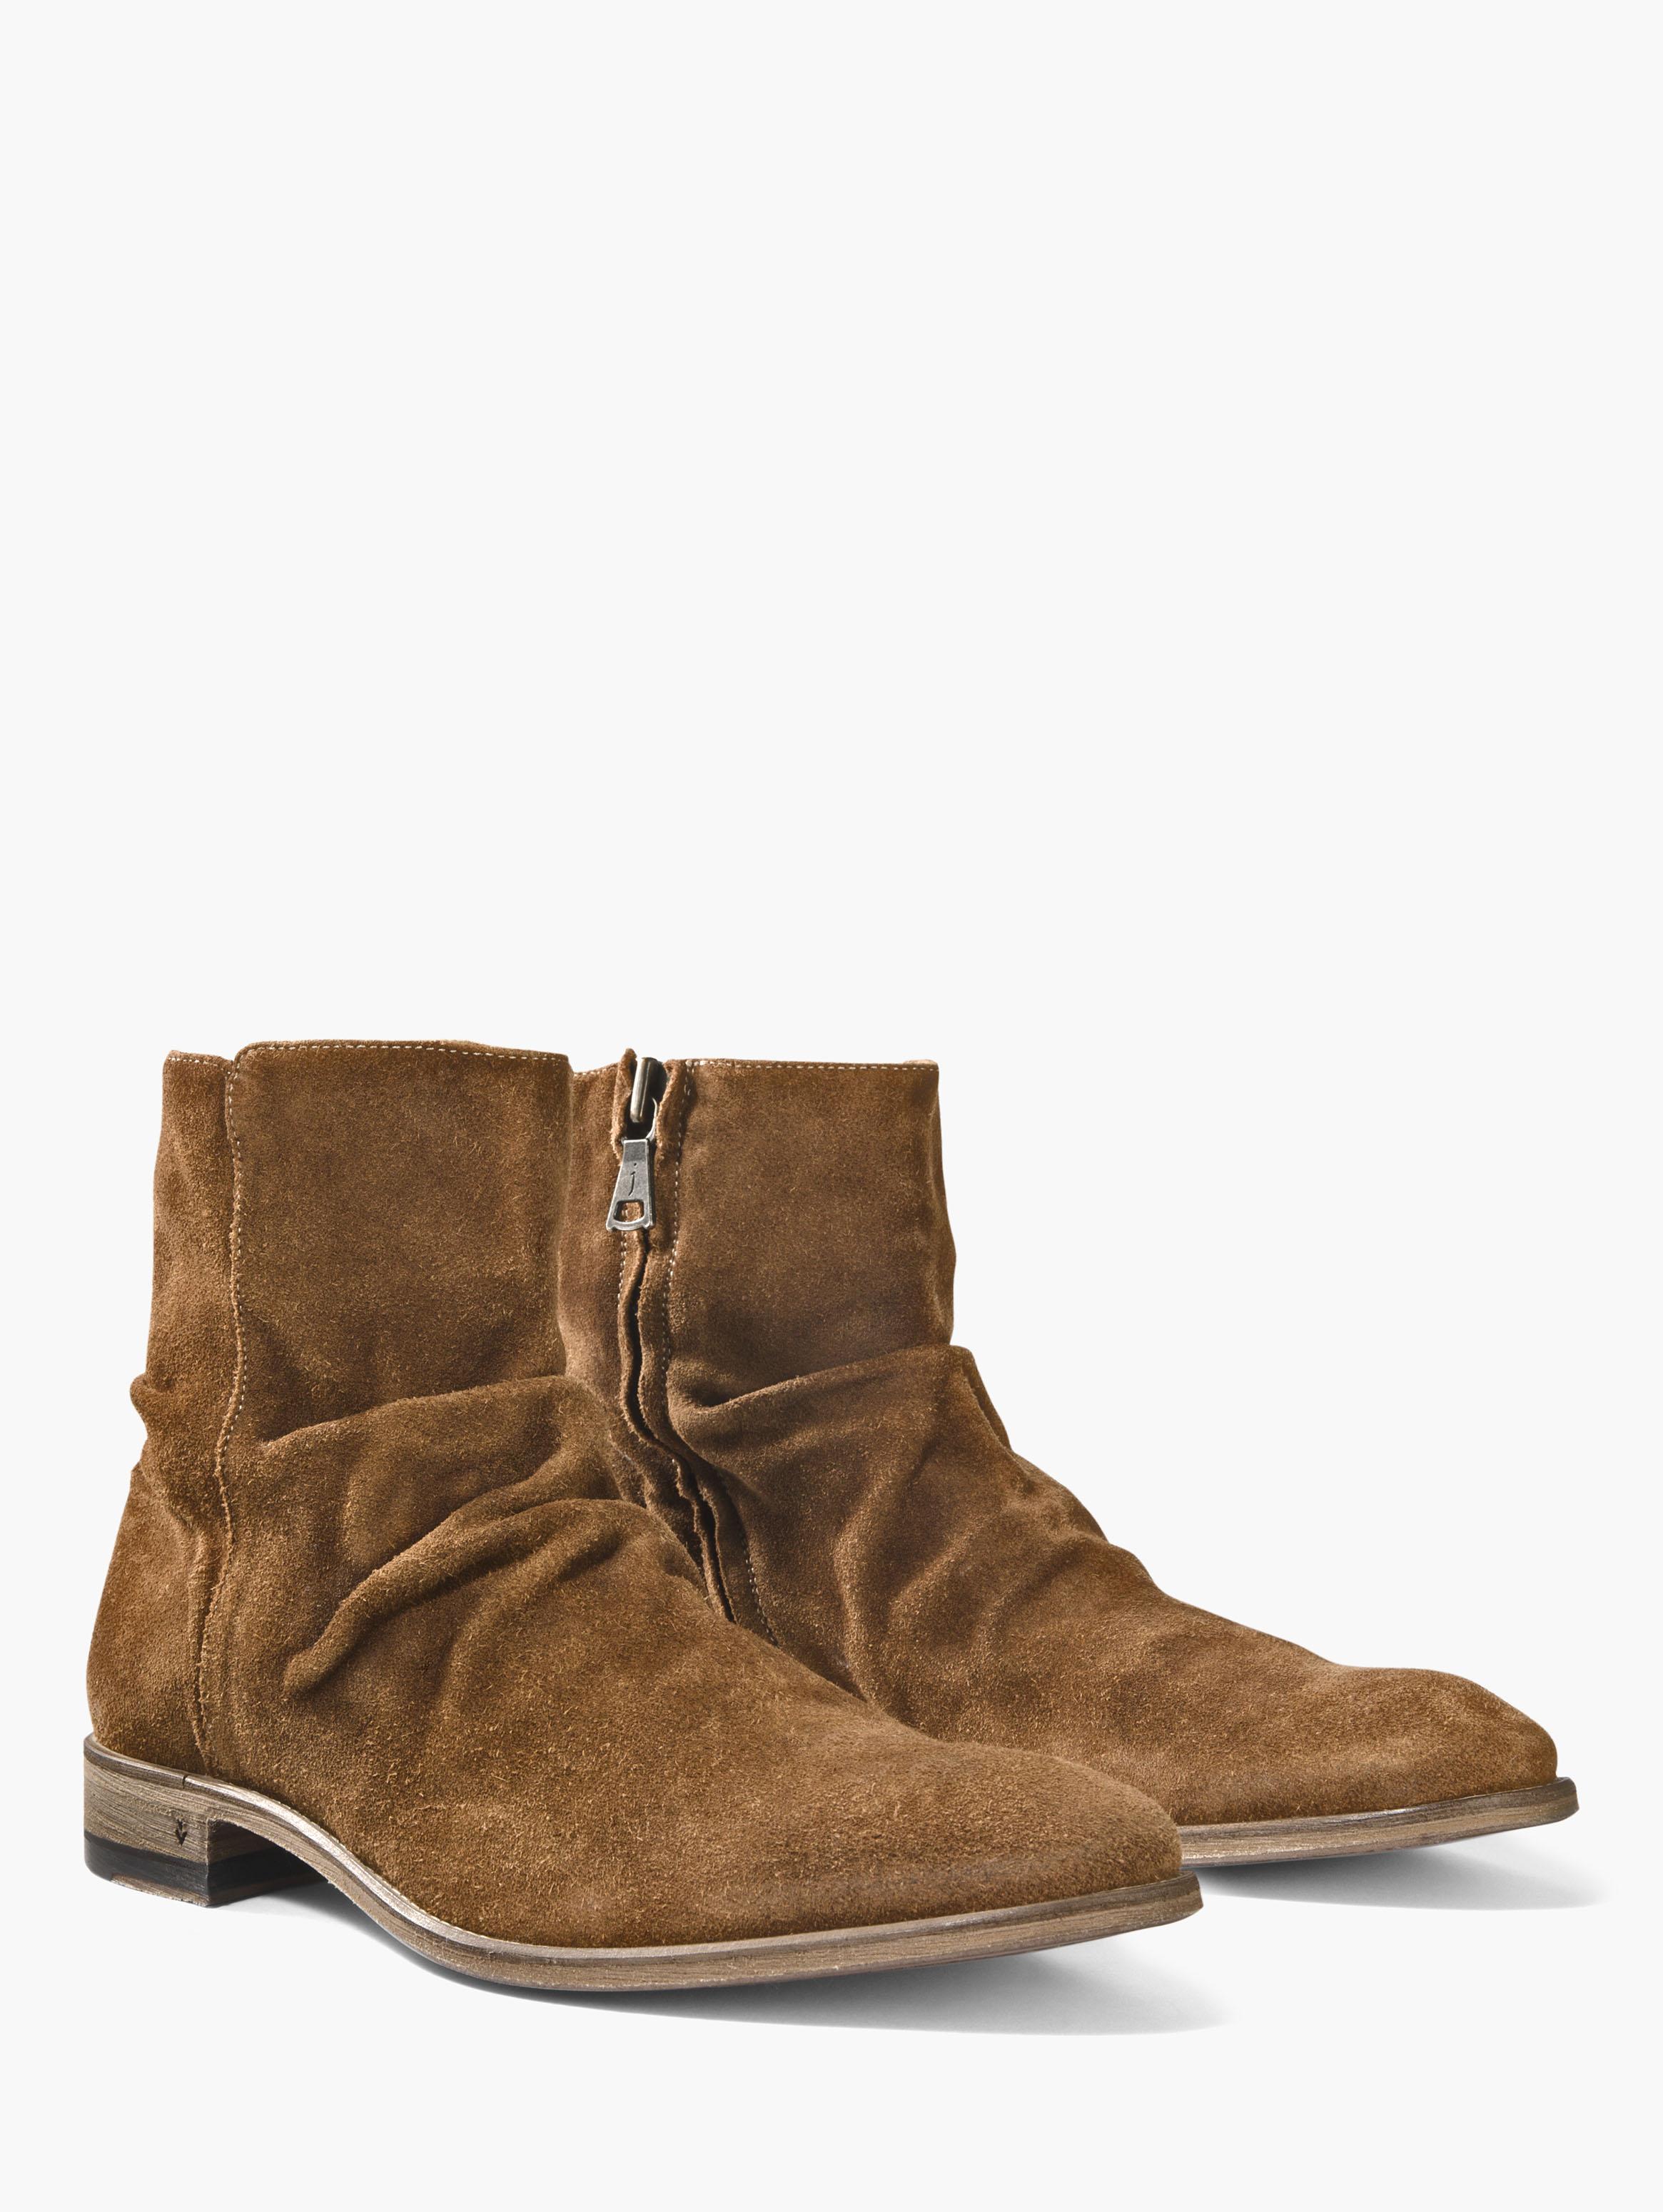 Suede Morrison Sharpei Boot image number 1